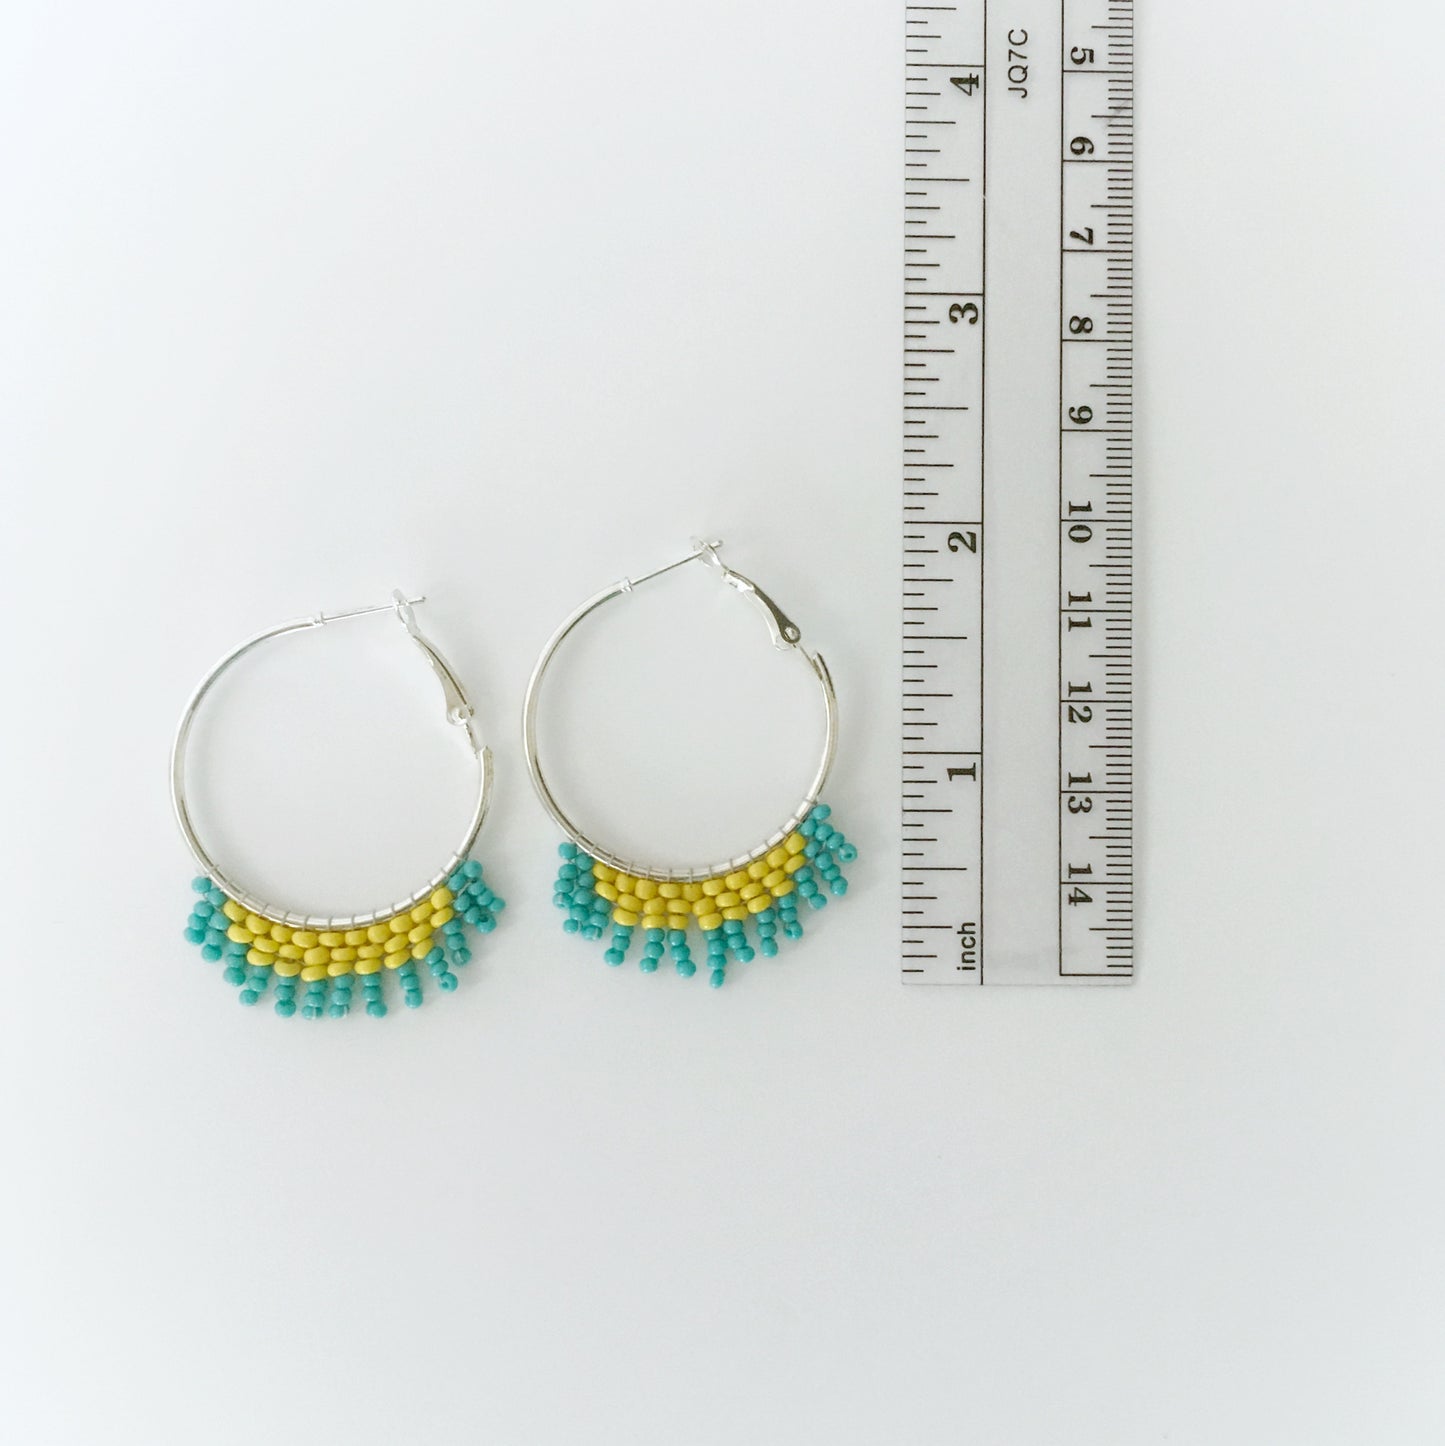 Oasis Bahama Blue and Gold Earrings